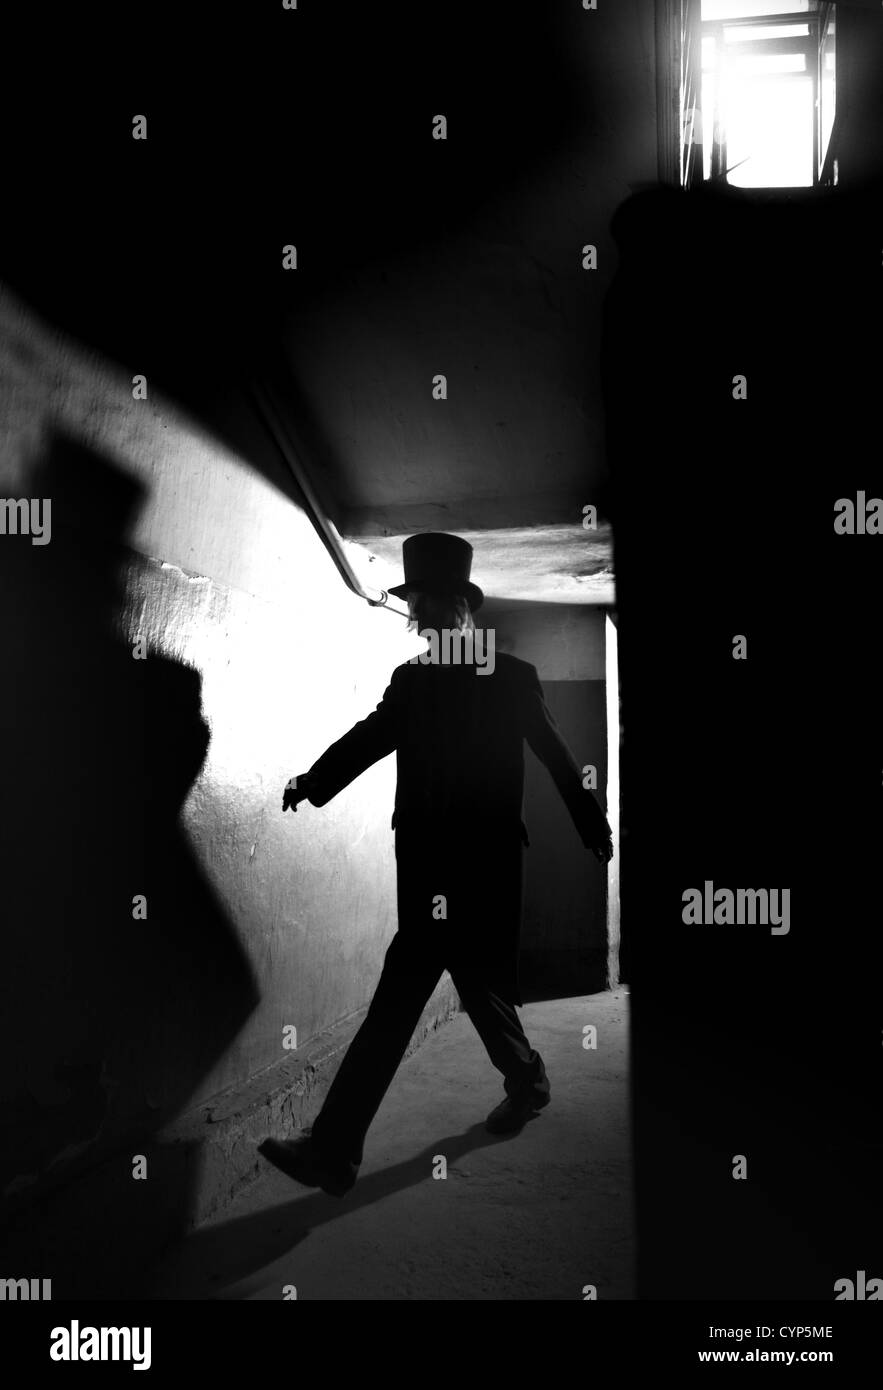 Silhouette of the man in black coat and hat going in the dark interior Stock Photo